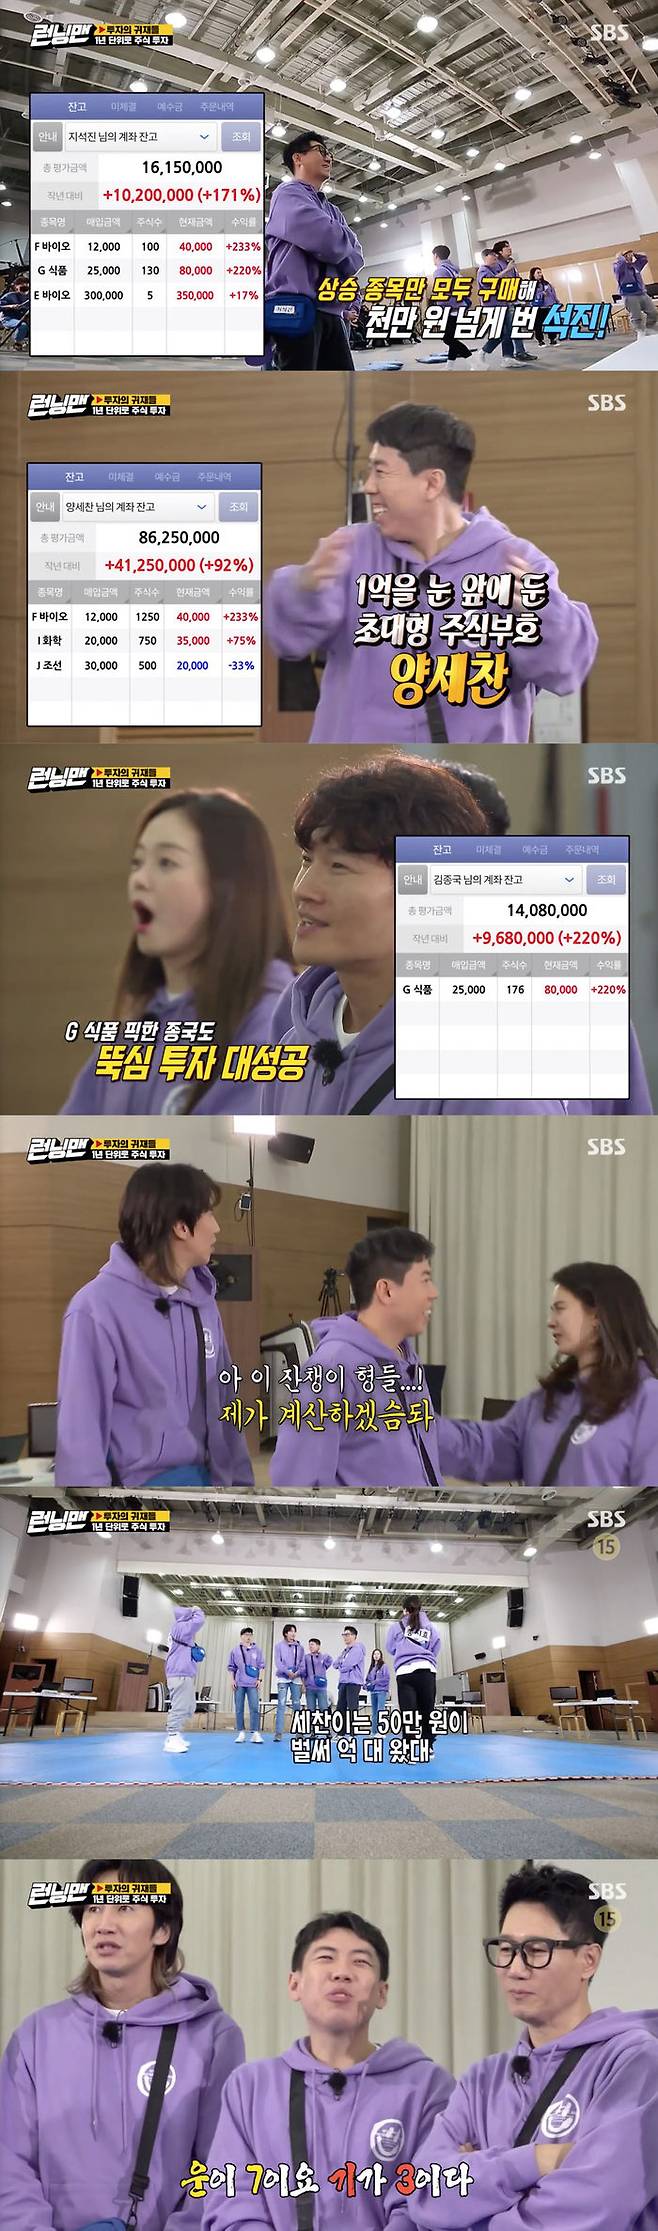 Yang Se-chans Asset has Billions of Units Penetration on the horizon.On SBS Running Man broadcasted on the 28th, 2021 Running Man investment competition was held after last week.The show revealed the results of the stock in 2016, which was last invested last week, with Vaio and food rising more than 200% and chemical leading 75%.Haha, who was in the last minute of the Vaio, and Kim Jong Kook, who put on the food with a lot of money, got a big profit.Yang Se-chan also made a slight loss by investing in Vaio, Chemistry and shipbuilding, but it made another jackpot with much higher profits.In particular, Yang Se-chan started with 500,000 won and surprised everyone with the Asset Billions of Units Penetration in front of him.In 2016, Lee Kwang-soo and Song Ji-hyo also made profits, but it was not easy to exceed others because their capital was so small.Lee Kwang-soo said, Even if you climb up, you do not seem to have climbed because you are climbing a lot.The members said, Is this possible? And Yang Se-chan laughed at the news of the imminent Billions of Units Penetration of Yang Se-chan.